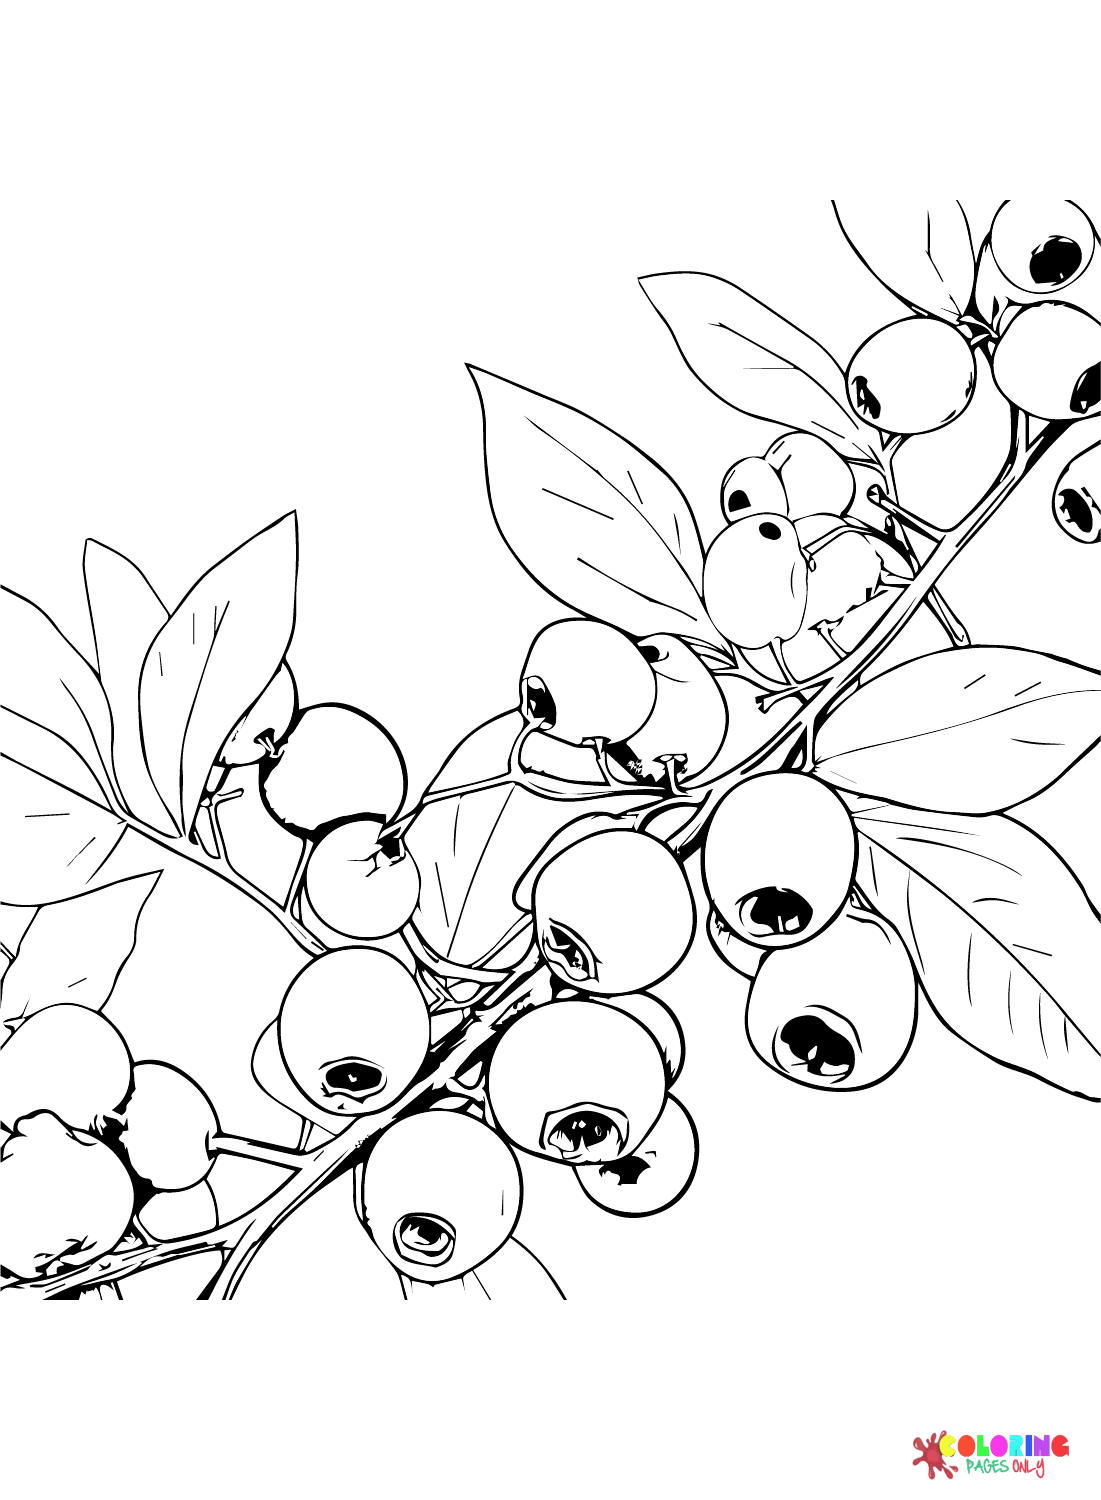 Blueberry Branch Coloring Page